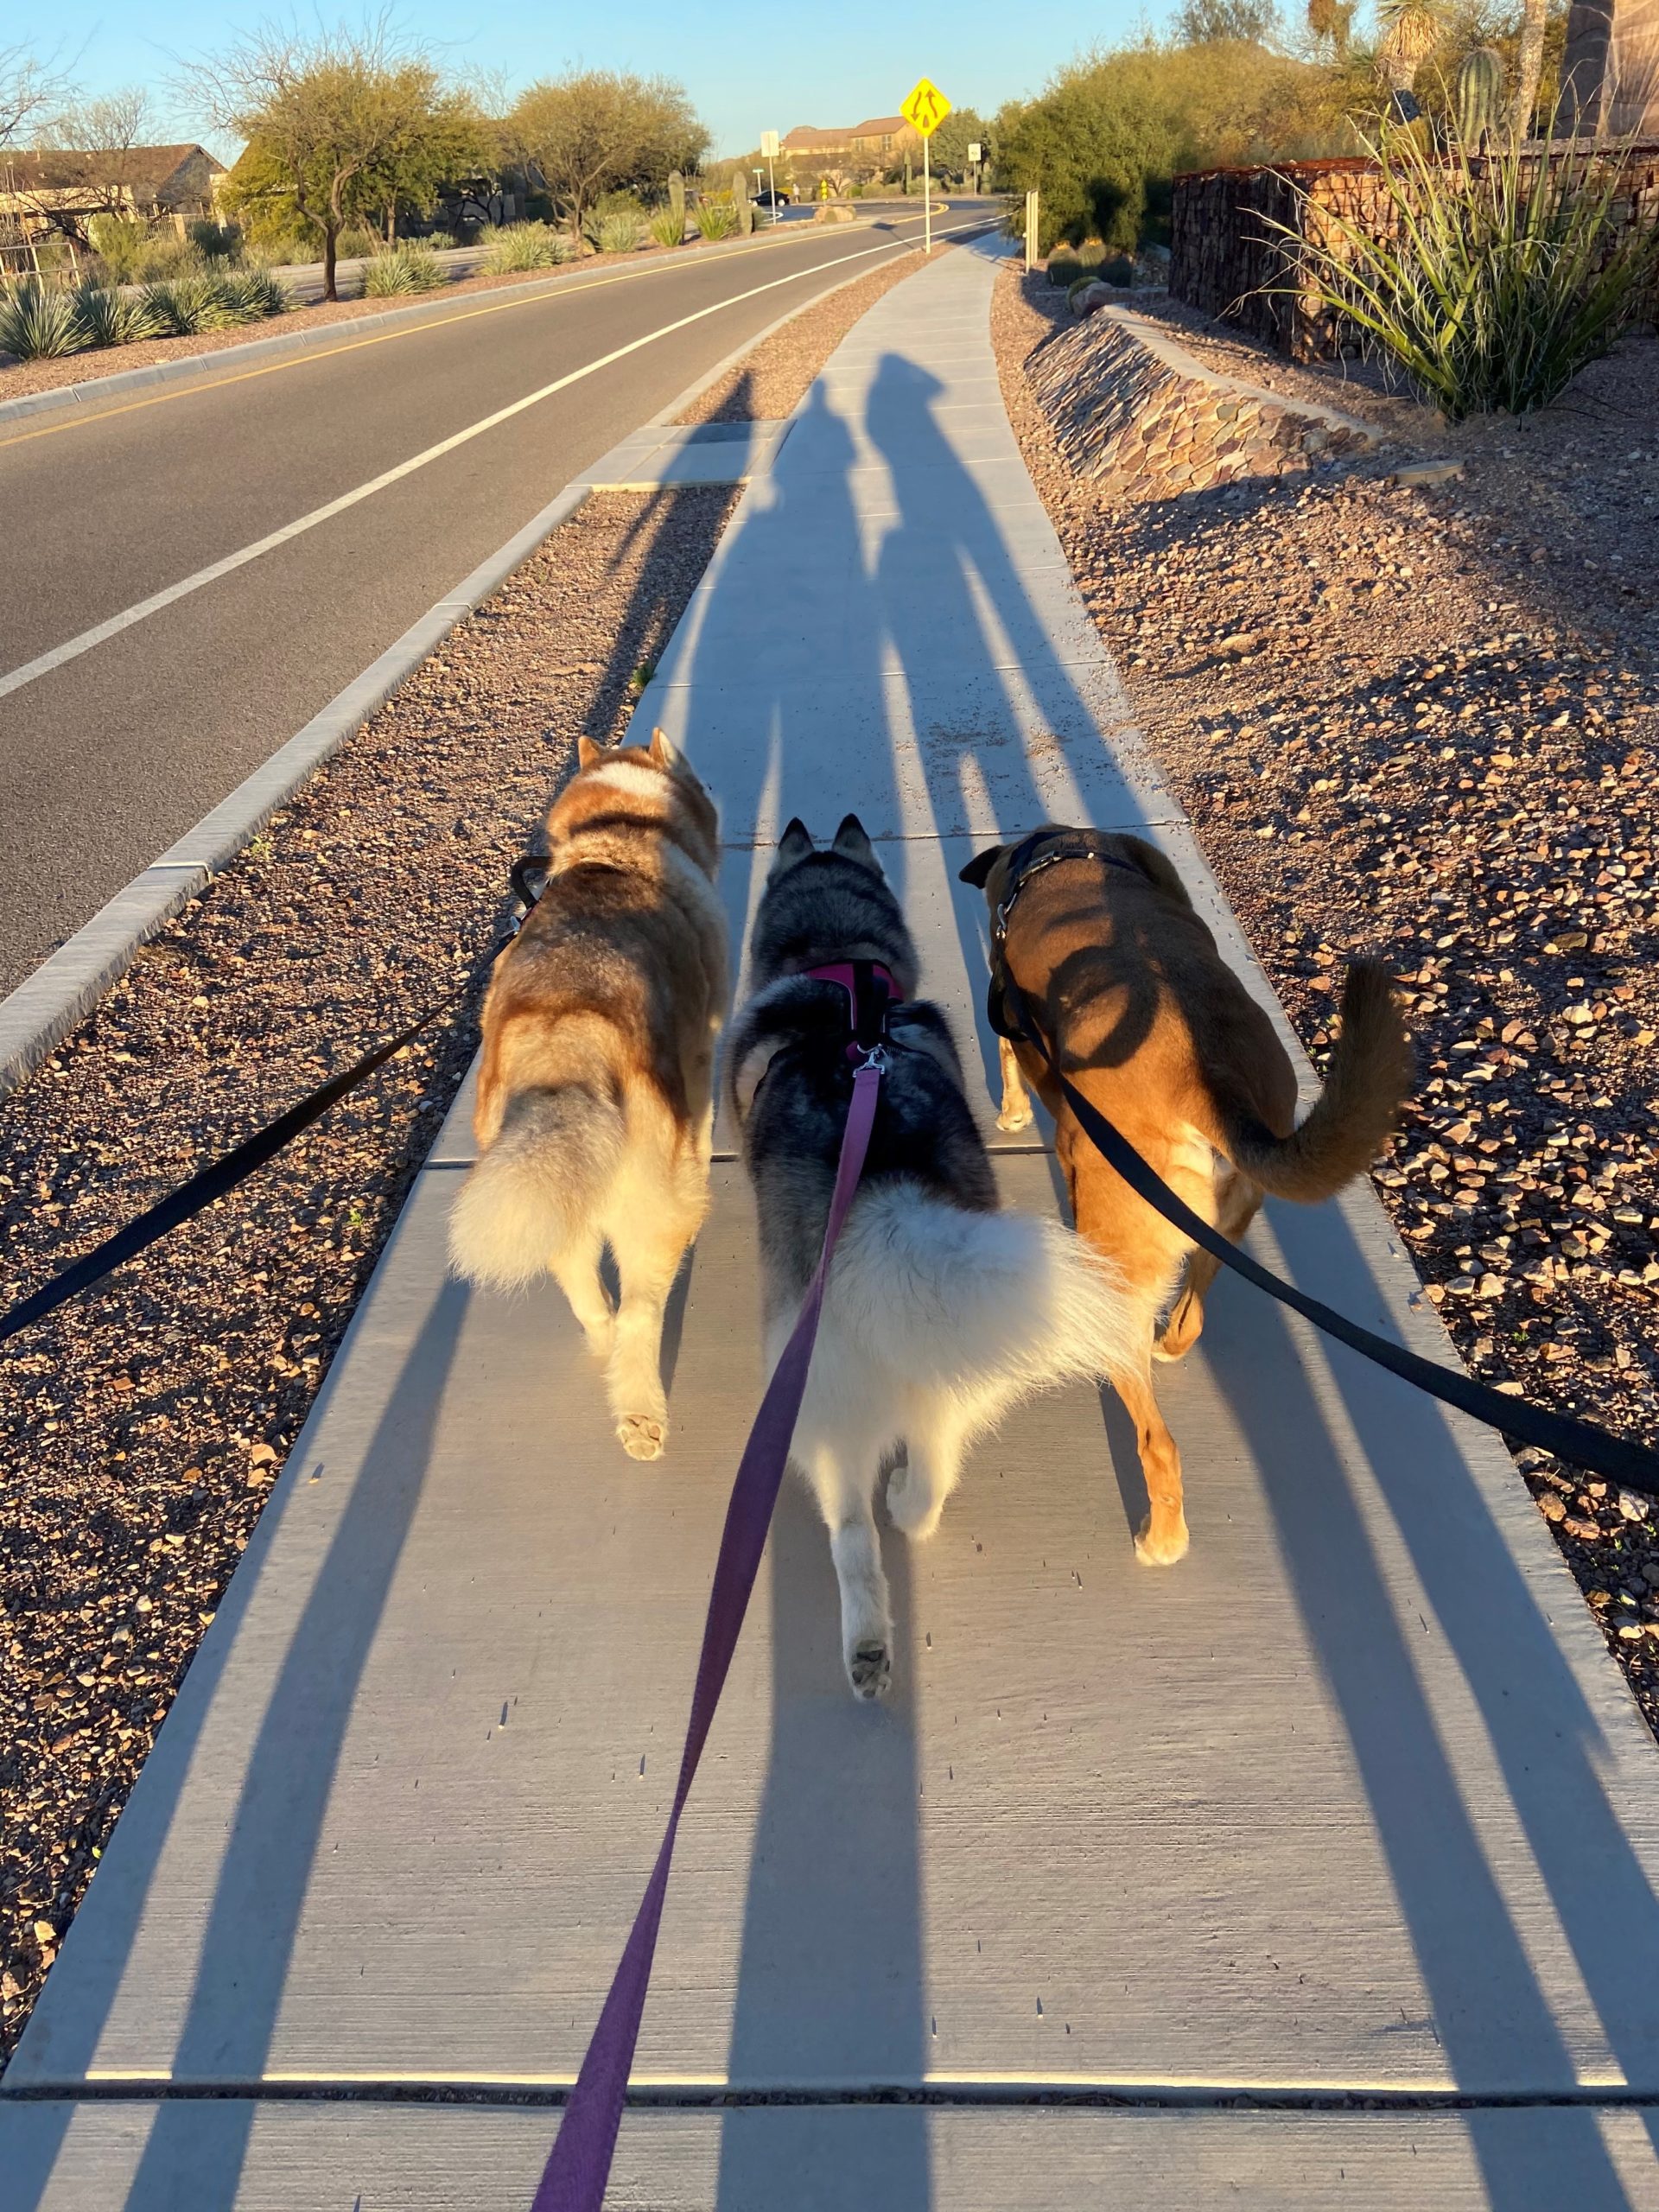 Tracy Seifried on morning walk with her four legged friends.